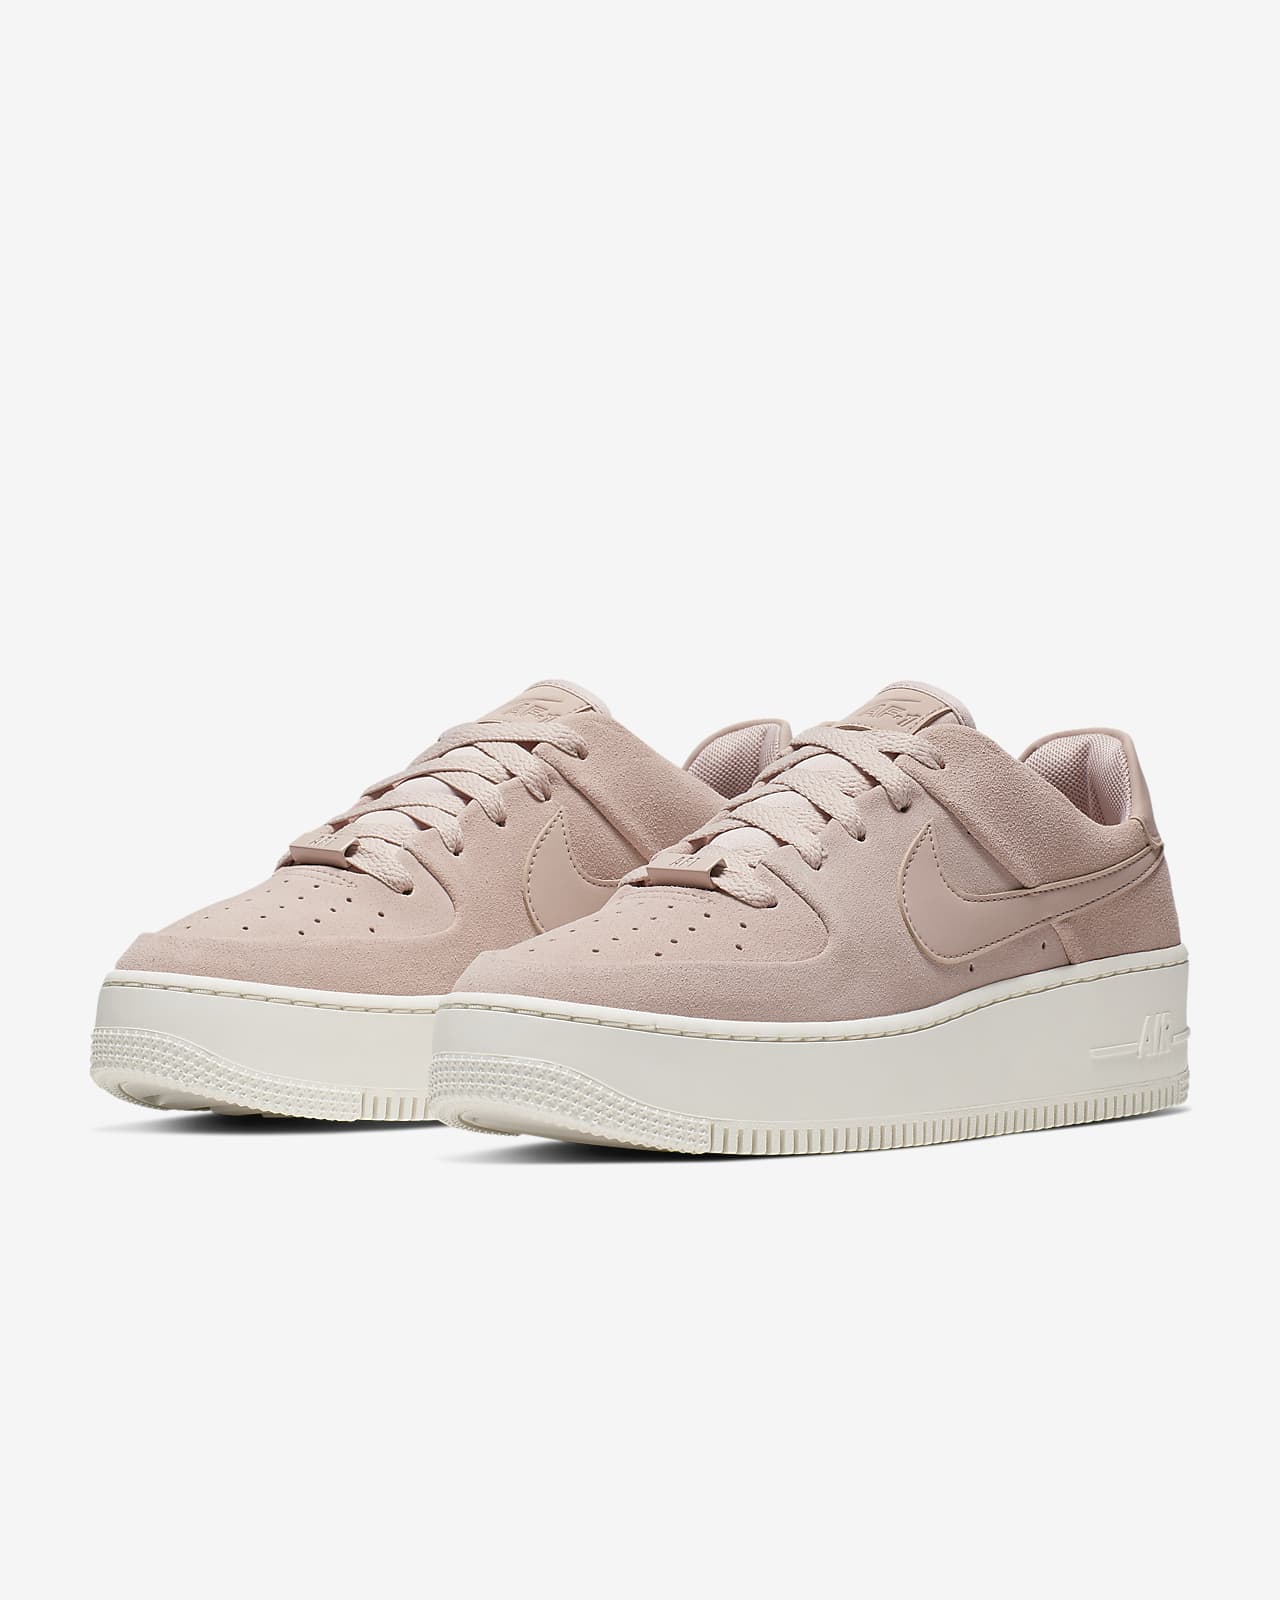 nike air force sage low canada